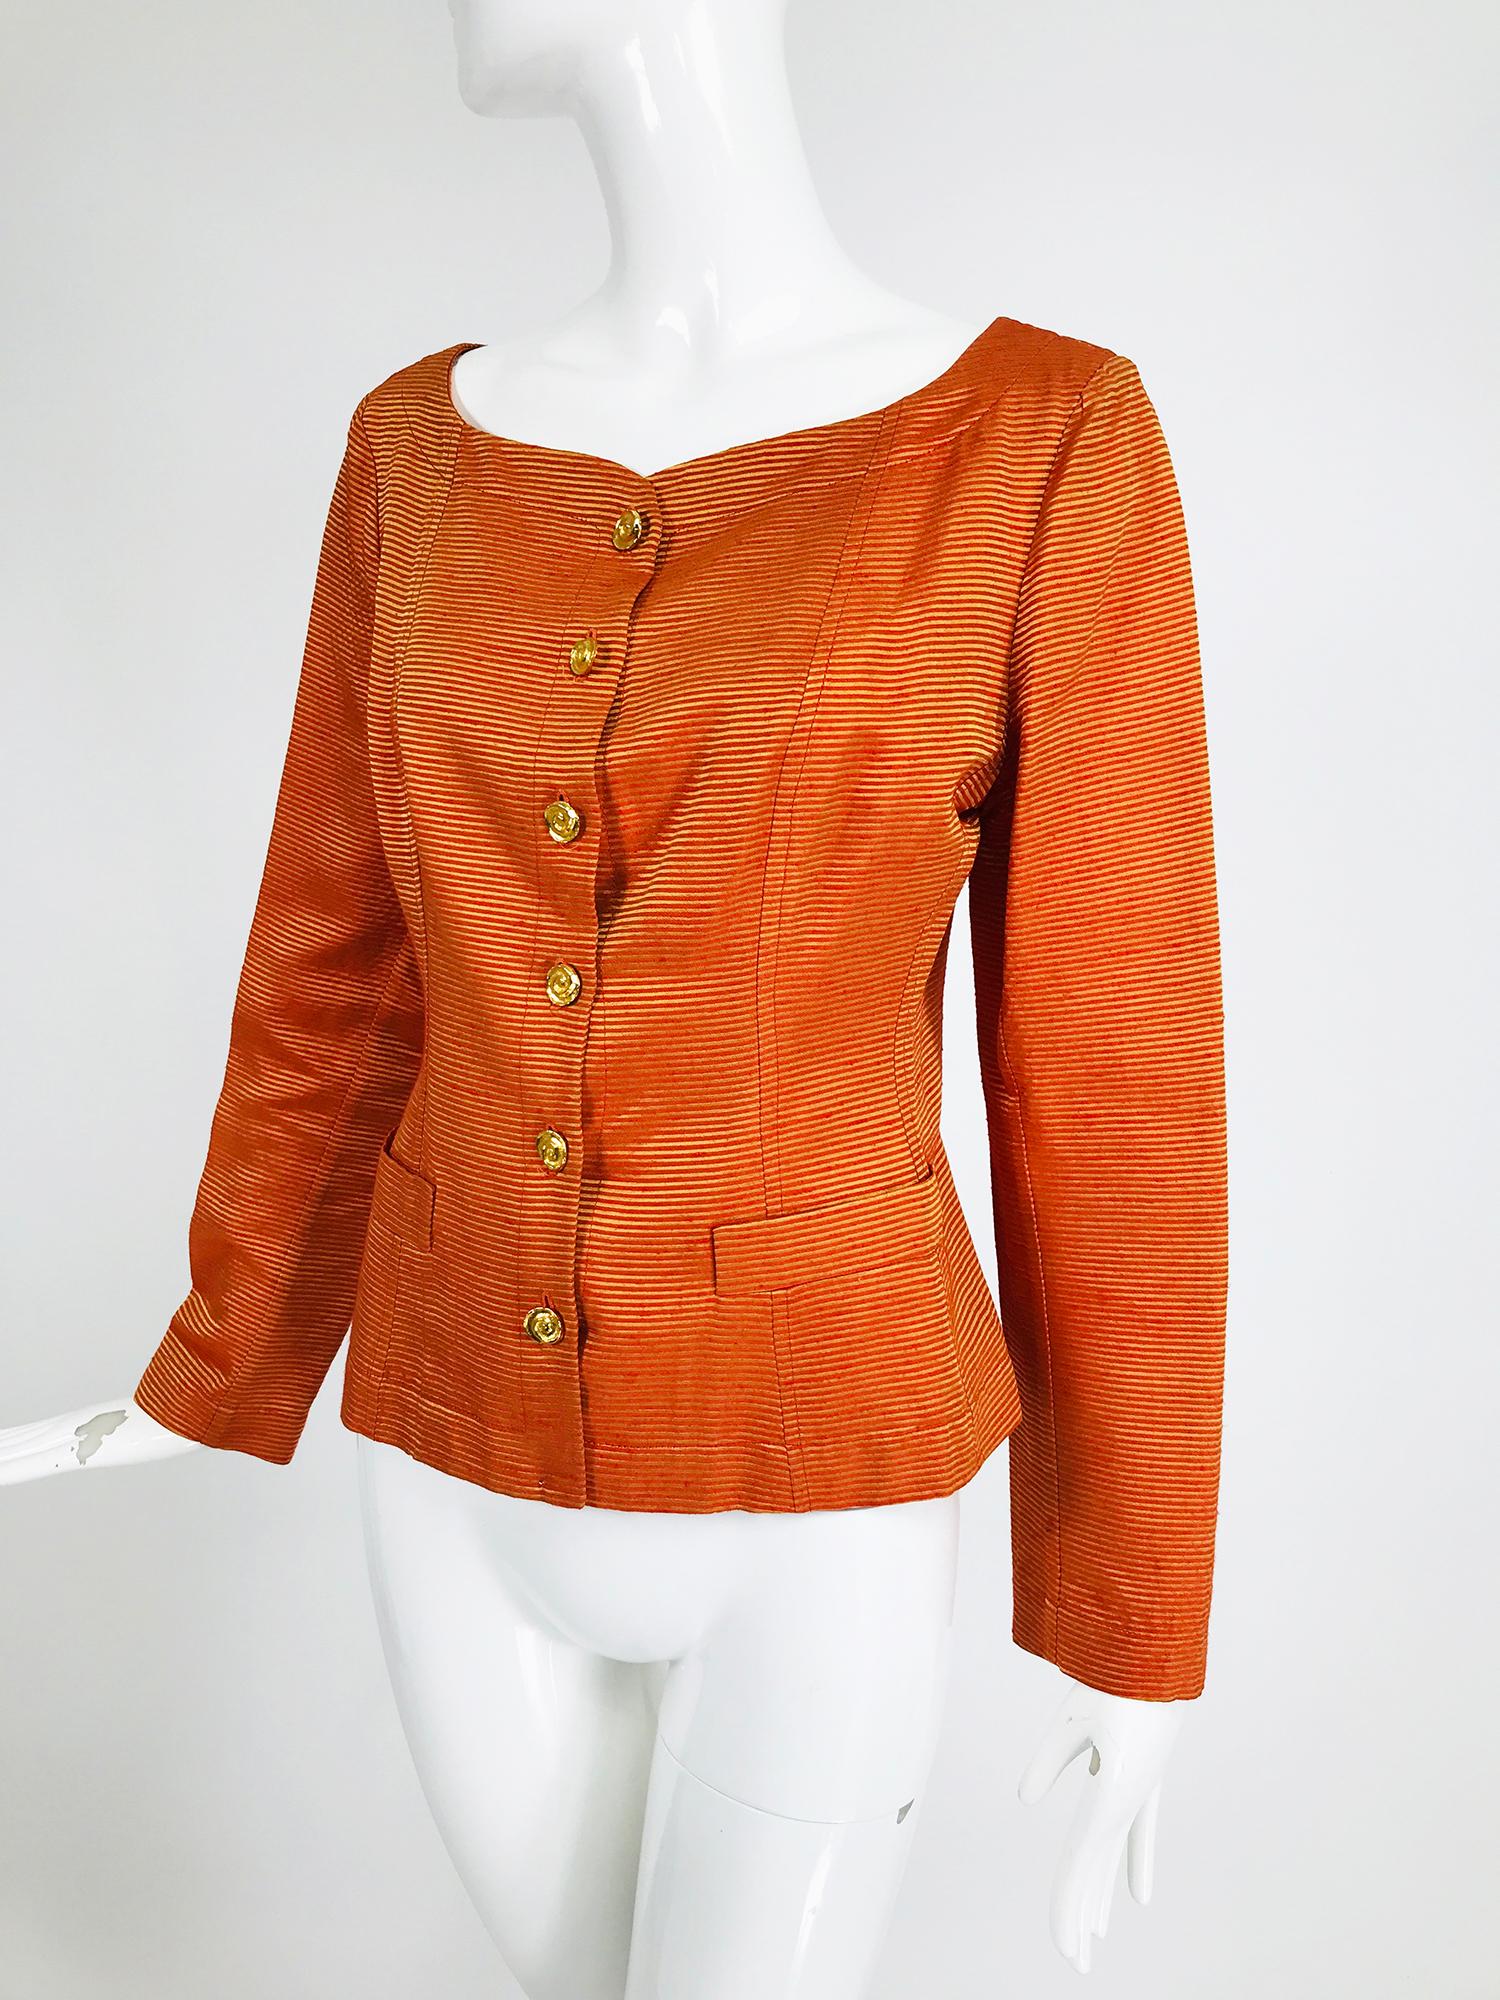 Yves Saint Laurent Rive Gauche vintage orange & gold stripe faille jacket with gold buttons. This jacket looks great with white jeans. Ribbed fabric with a small slub. 
Single breasted jacket with scoop neckline, long sleeves with single button